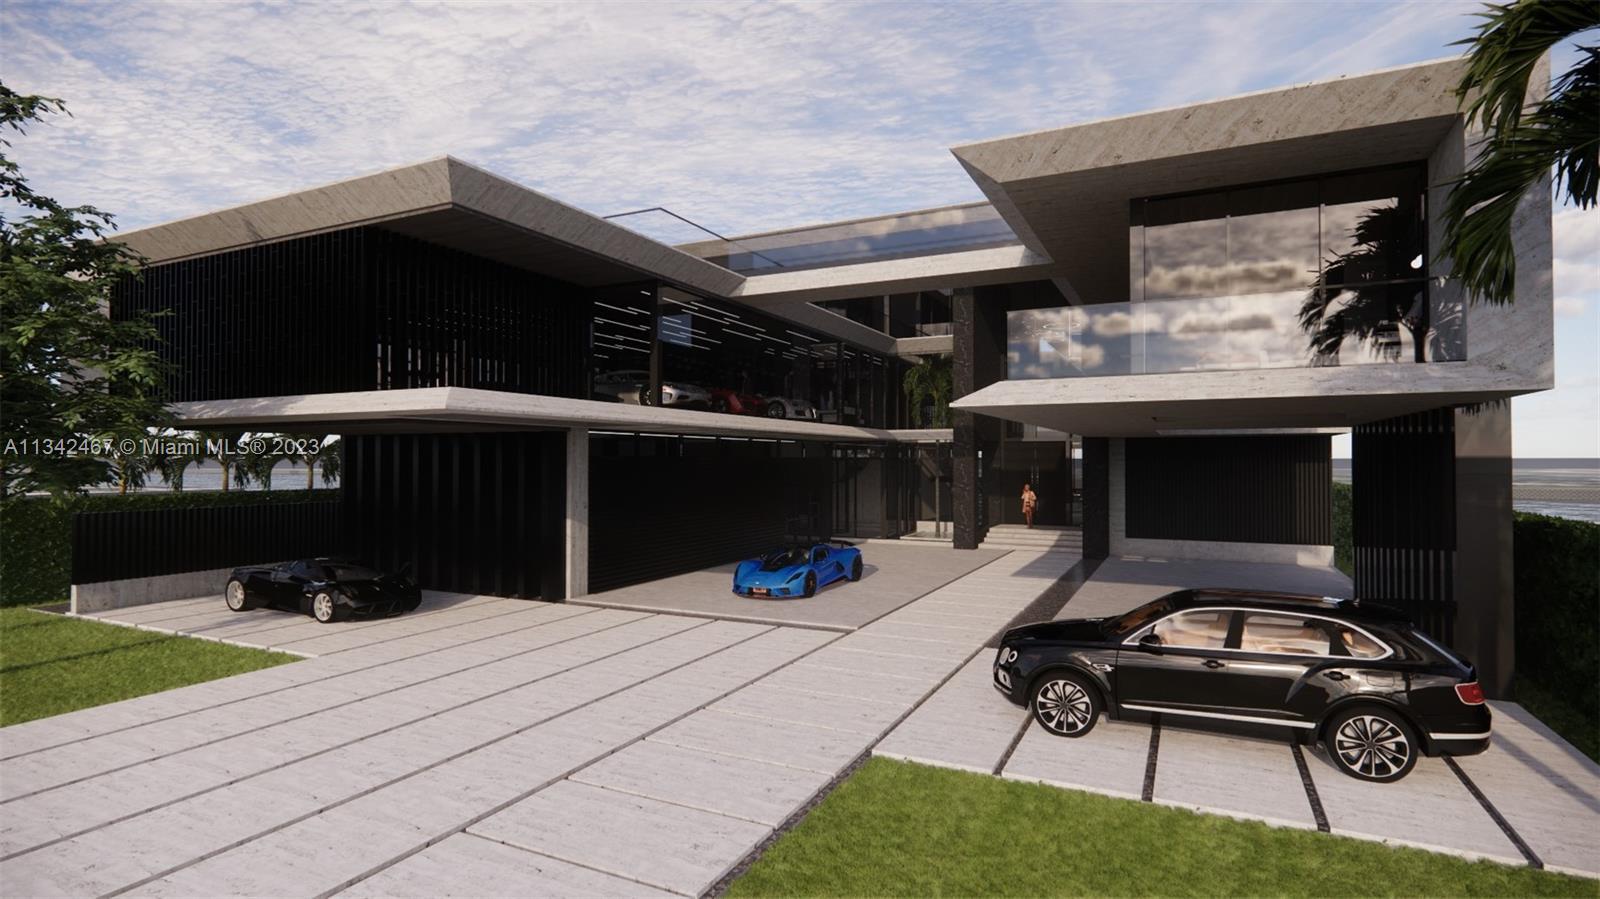 Start your planning! Astounding opportunity to build your modern masterpiece on this prime oversized